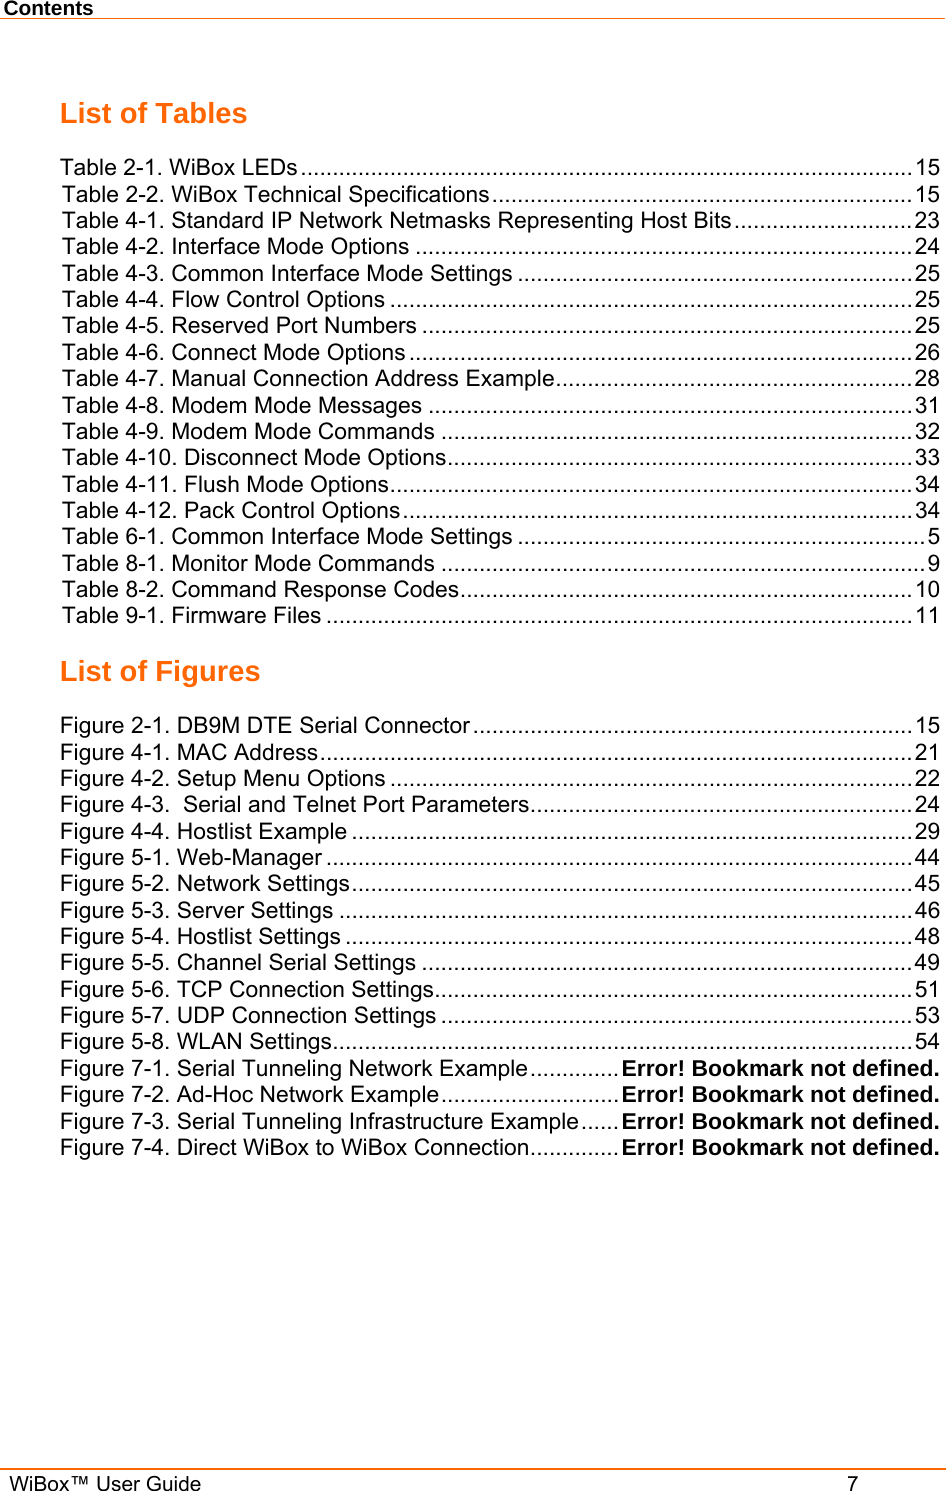 Contents  WiBox™ User Guide  7 List of Tables Table 2-1. WiBox LEDs................................................................................................15 Table 2-2. WiBox Technical Specifications..................................................................15 Table 4-1. Standard IP Network Netmasks Representing Host Bits............................23 Table 4-2. Interface Mode Options ..............................................................................24 Table 4-3. Common Interface Mode Settings ..............................................................25 Table 4-4. Flow Control Options ..................................................................................25 Table 4-5. Reserved Port Numbers .............................................................................25 Table 4-6. Connect Mode Options ...............................................................................26 Table 4-7. Manual Connection Address Example........................................................28 Table 4-8. Modem Mode Messages ............................................................................31 Table 4-9. Modem Mode Commands ..........................................................................32 Table 4-10. Disconnect Mode Options.........................................................................33 Table 4-11. Flush Mode Options..................................................................................34 Table 4-12. Pack Control Options................................................................................34 Table 6-1. Common Interface Mode Settings ................................................................5 Table 8-1. Monitor Mode Commands ............................................................................9 Table 8-2. Command Response Codes.......................................................................10 Table 9-1. Firmware Files ............................................................................................11 List of Figures Figure 2-1. DB9M DTE Serial Connector.....................................................................15 Figure 4-1. MAC Address.............................................................................................21 Figure 4-2. Setup Menu Options ..................................................................................22 Figure 4-3.  Serial and Telnet Port Parameters............................................................24 Figure 4-4. Hostlist Example ........................................................................................29 Figure 5-1. Web-Manager ............................................................................................44 Figure 5-2. Network Settings........................................................................................45 Figure 5-3. Server Settings ..........................................................................................46 Figure 5-4. Hostlist Settings .........................................................................................48 Figure 5-5. Channel Serial Settings .............................................................................49 Figure 5-6. TCP Connection Settings...........................................................................51 Figure 5-7. UDP Connection Settings ..........................................................................53 Figure 5-8. WLAN Settings...........................................................................................54 Figure 7-1. Serial Tunneling Network Example..............Error! Bookmark not defined. Figure 7-2. Ad-Hoc Network Example............................Error! Bookmark not defined. Figure 7-3. Serial Tunneling Infrastructure Example......Error! Bookmark not defined. Figure 7-4. Direct WiBox to WiBox Connection.............. Error! Bookmark not defined.  